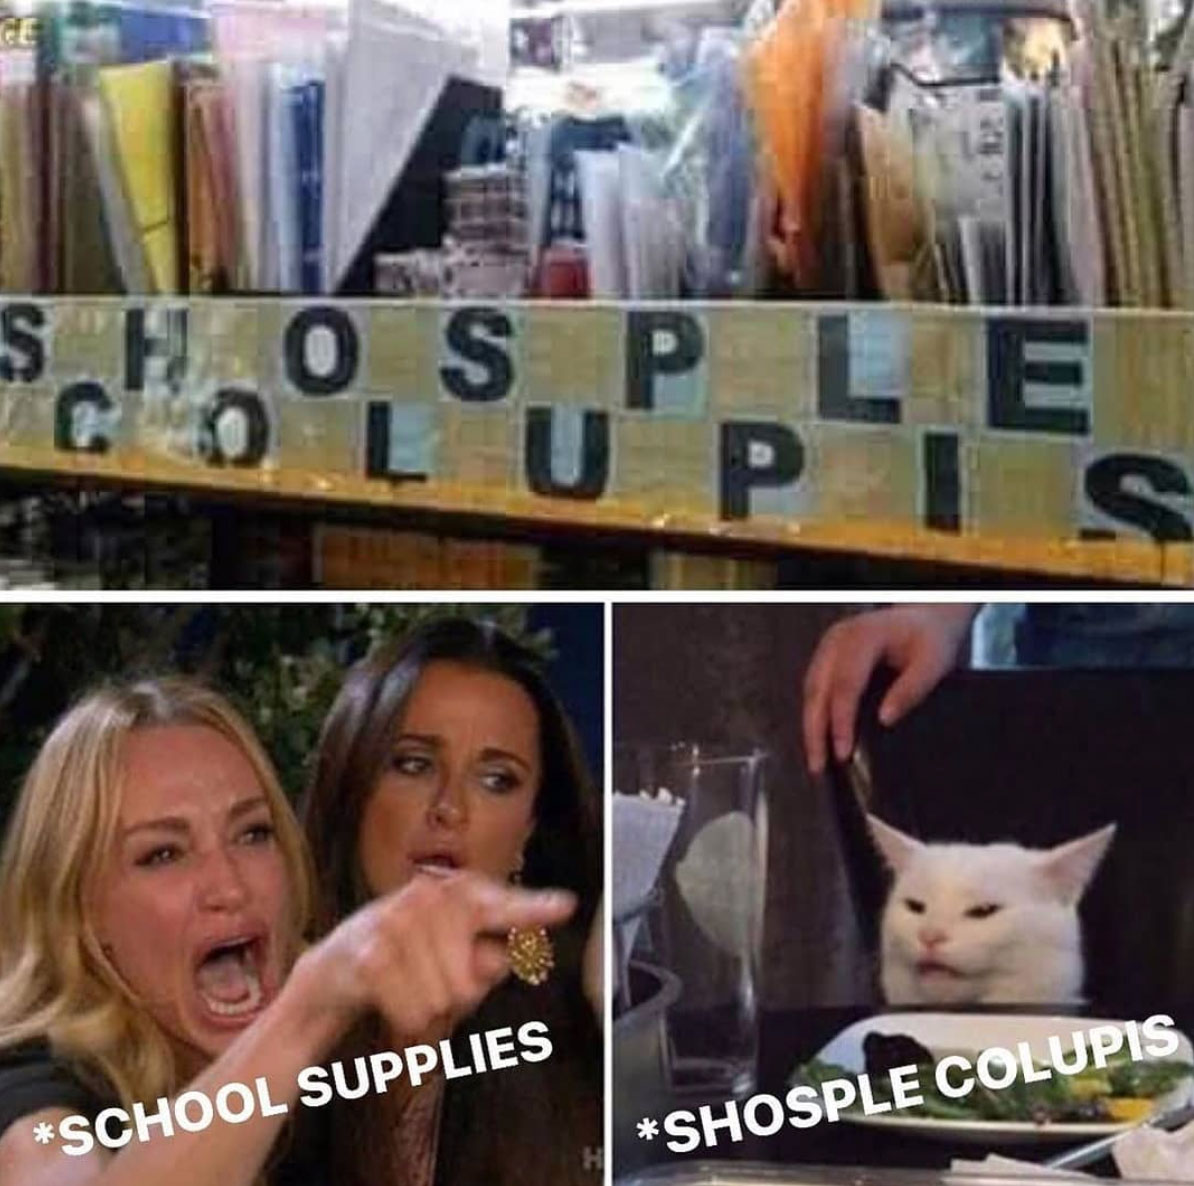 woman yelling at a cat - school supplies